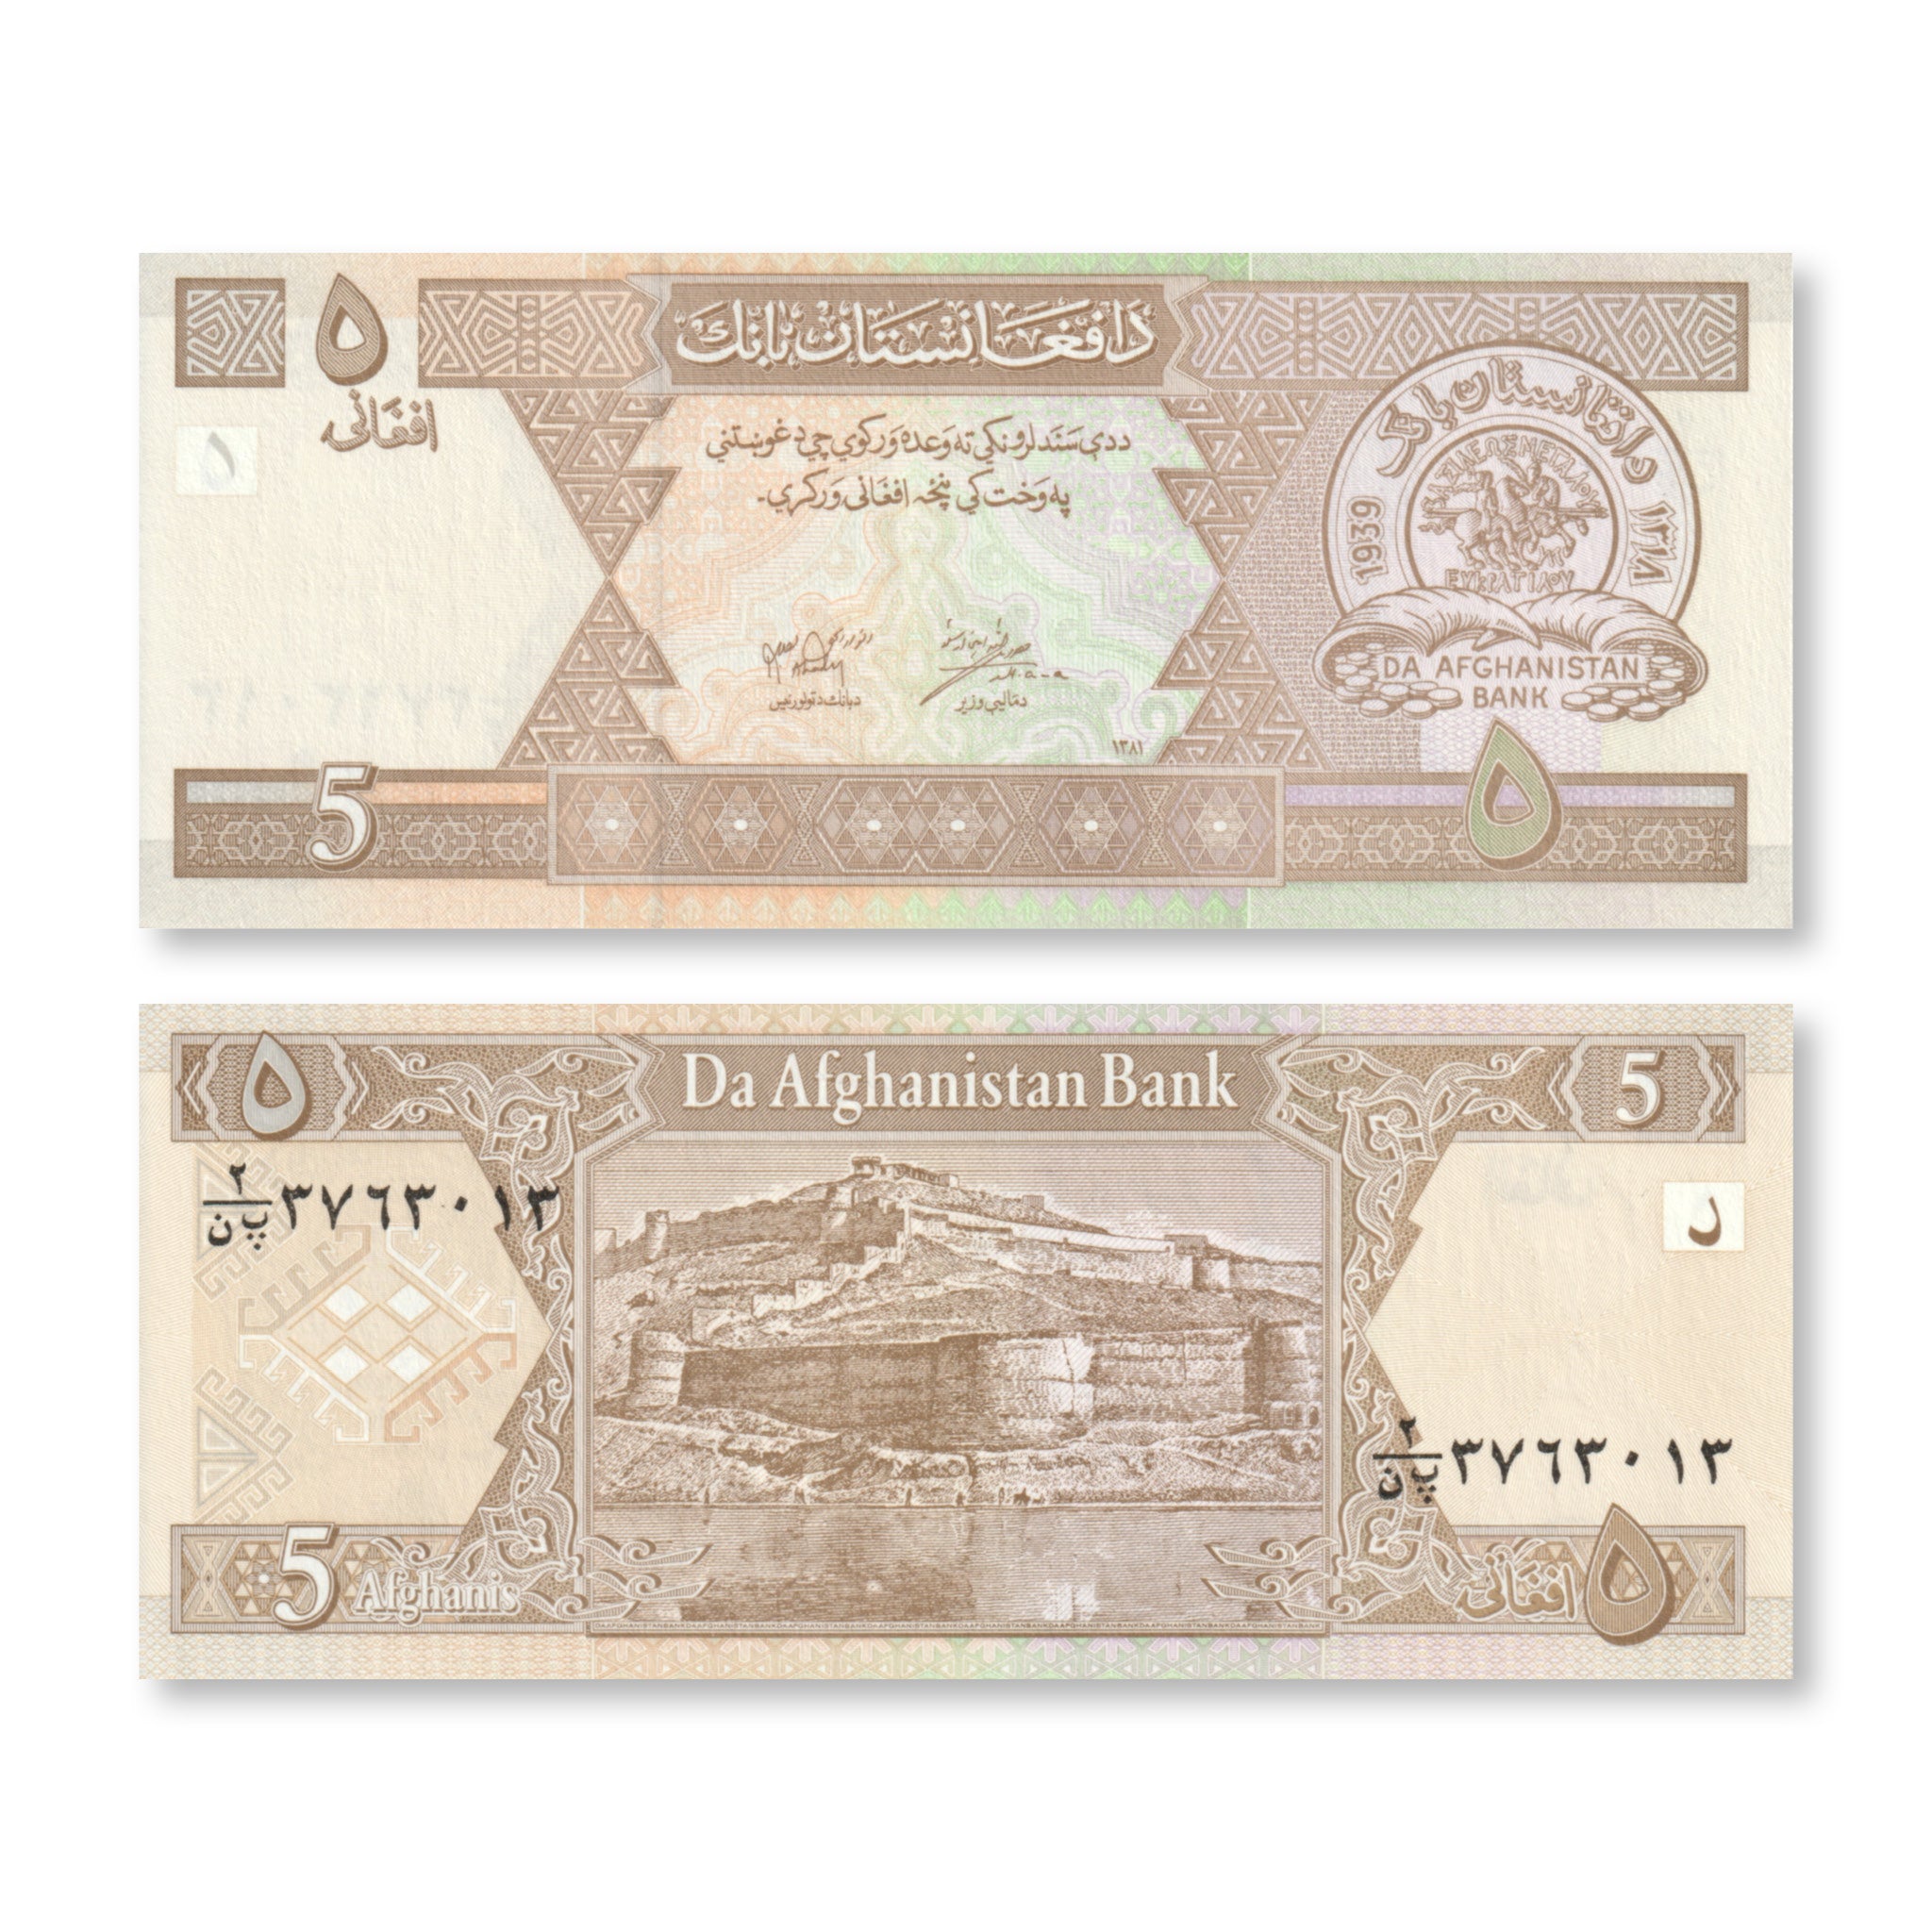 Afghanistan 5 Afghanis, 2002, B350a, P66, UNC - Robert's World Money - World Banknotes